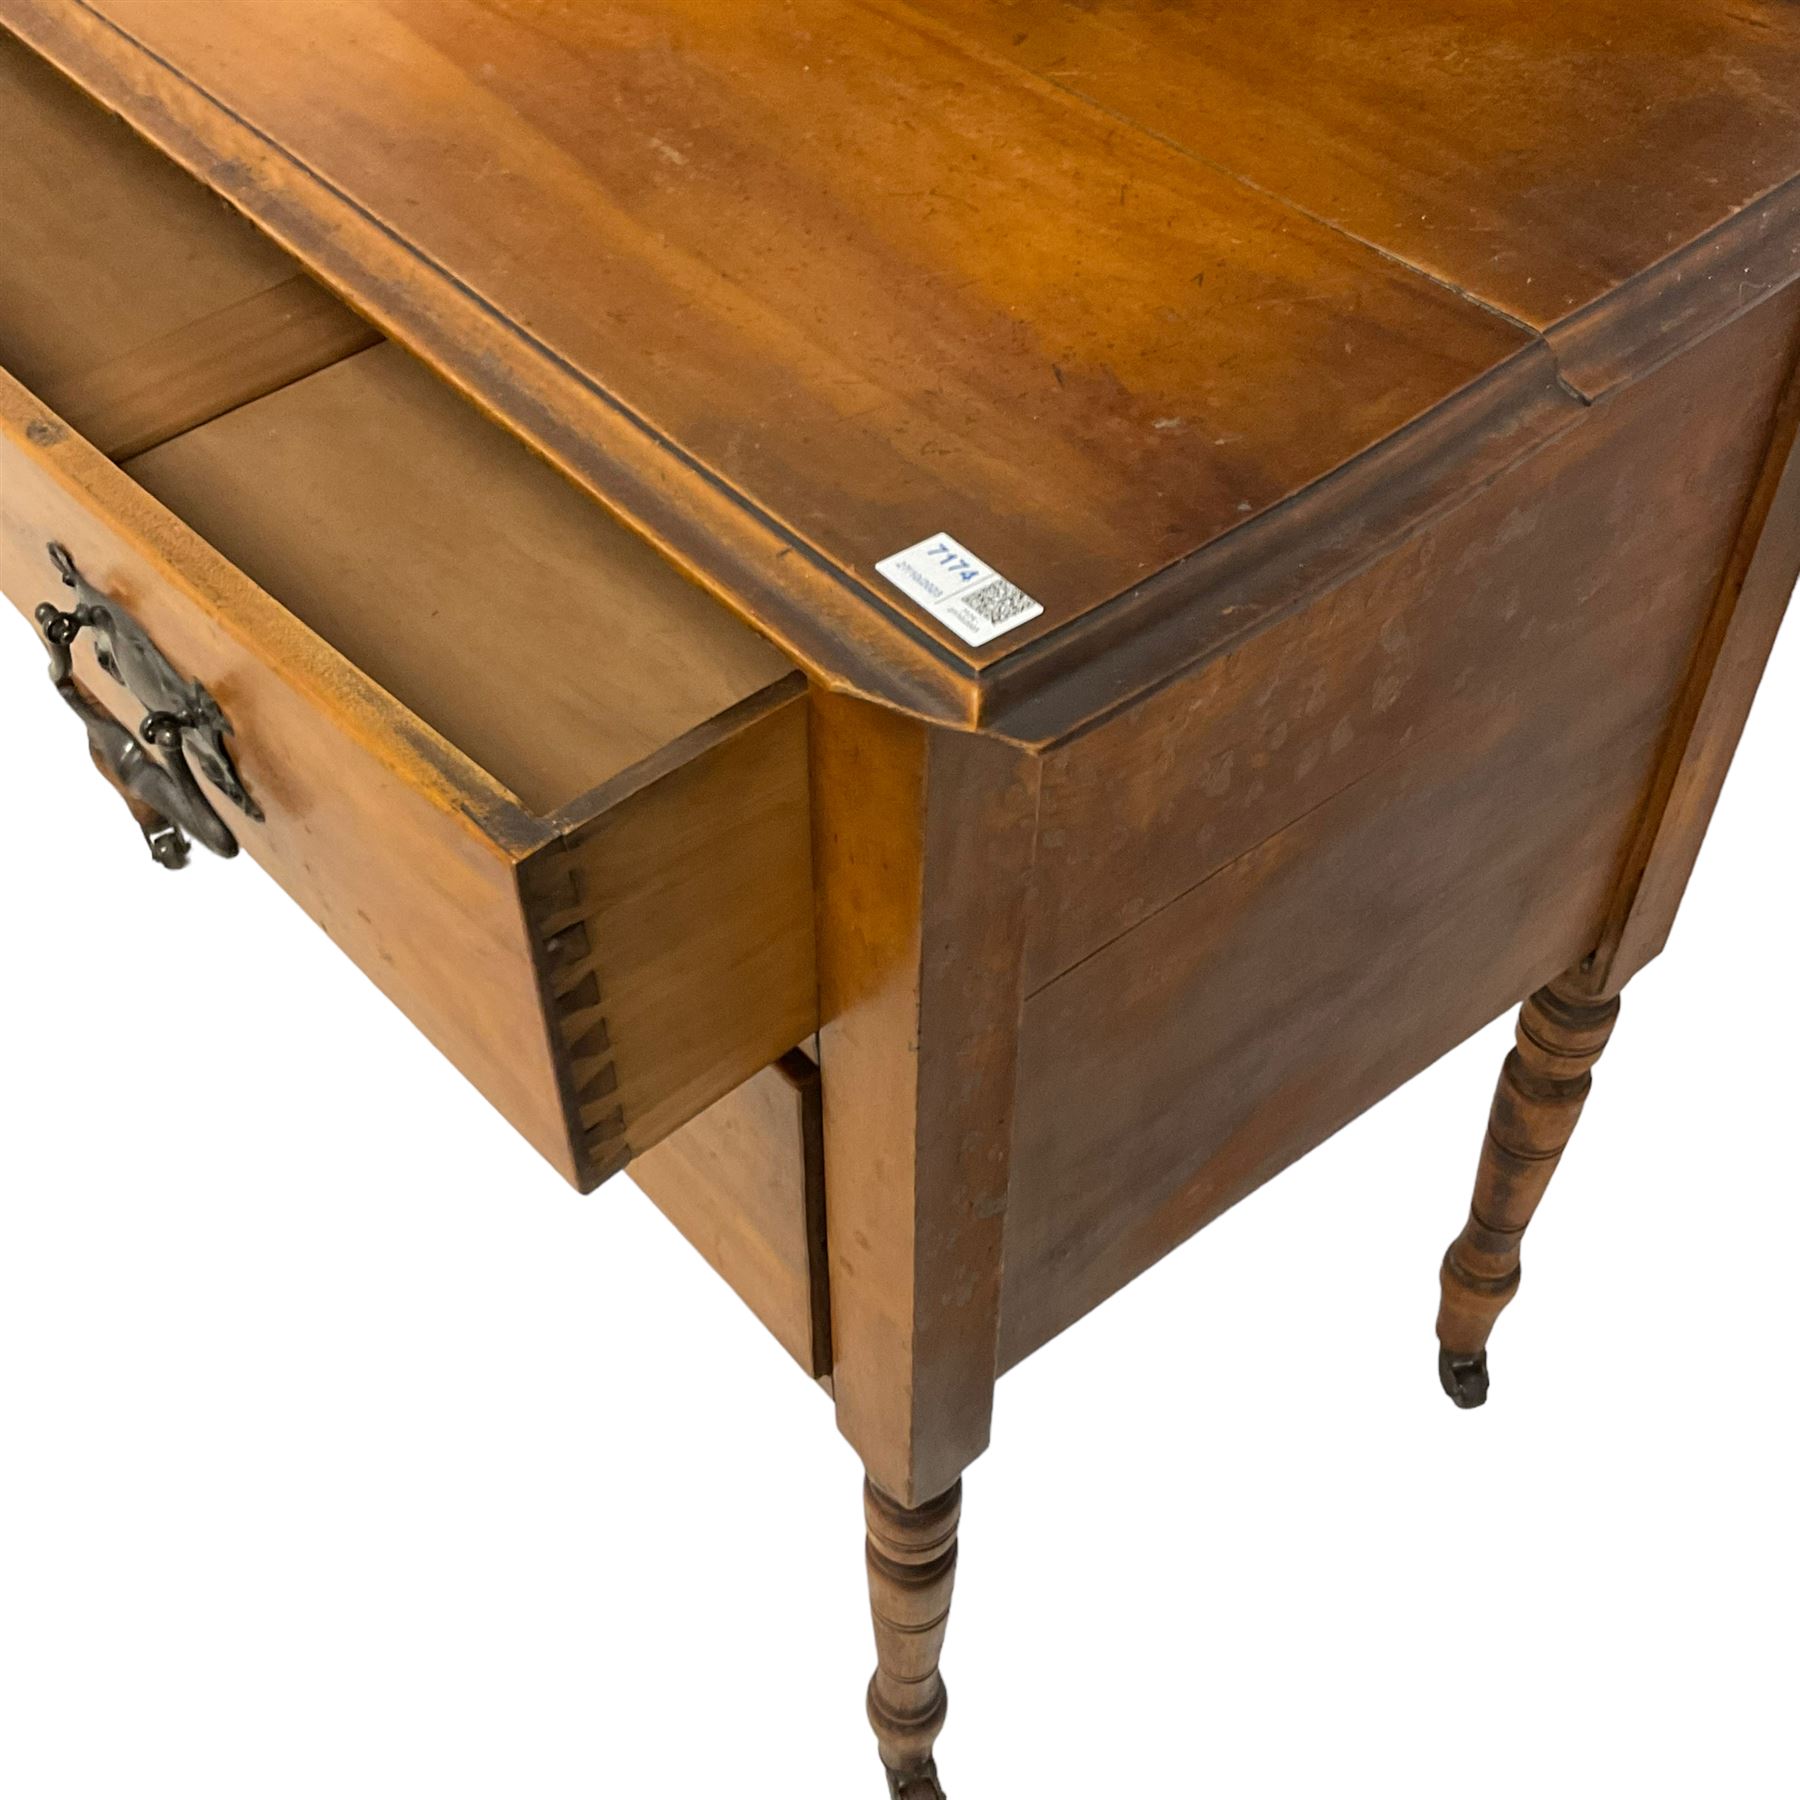 Late Victorian satin walnut dressing table - Image 5 of 7